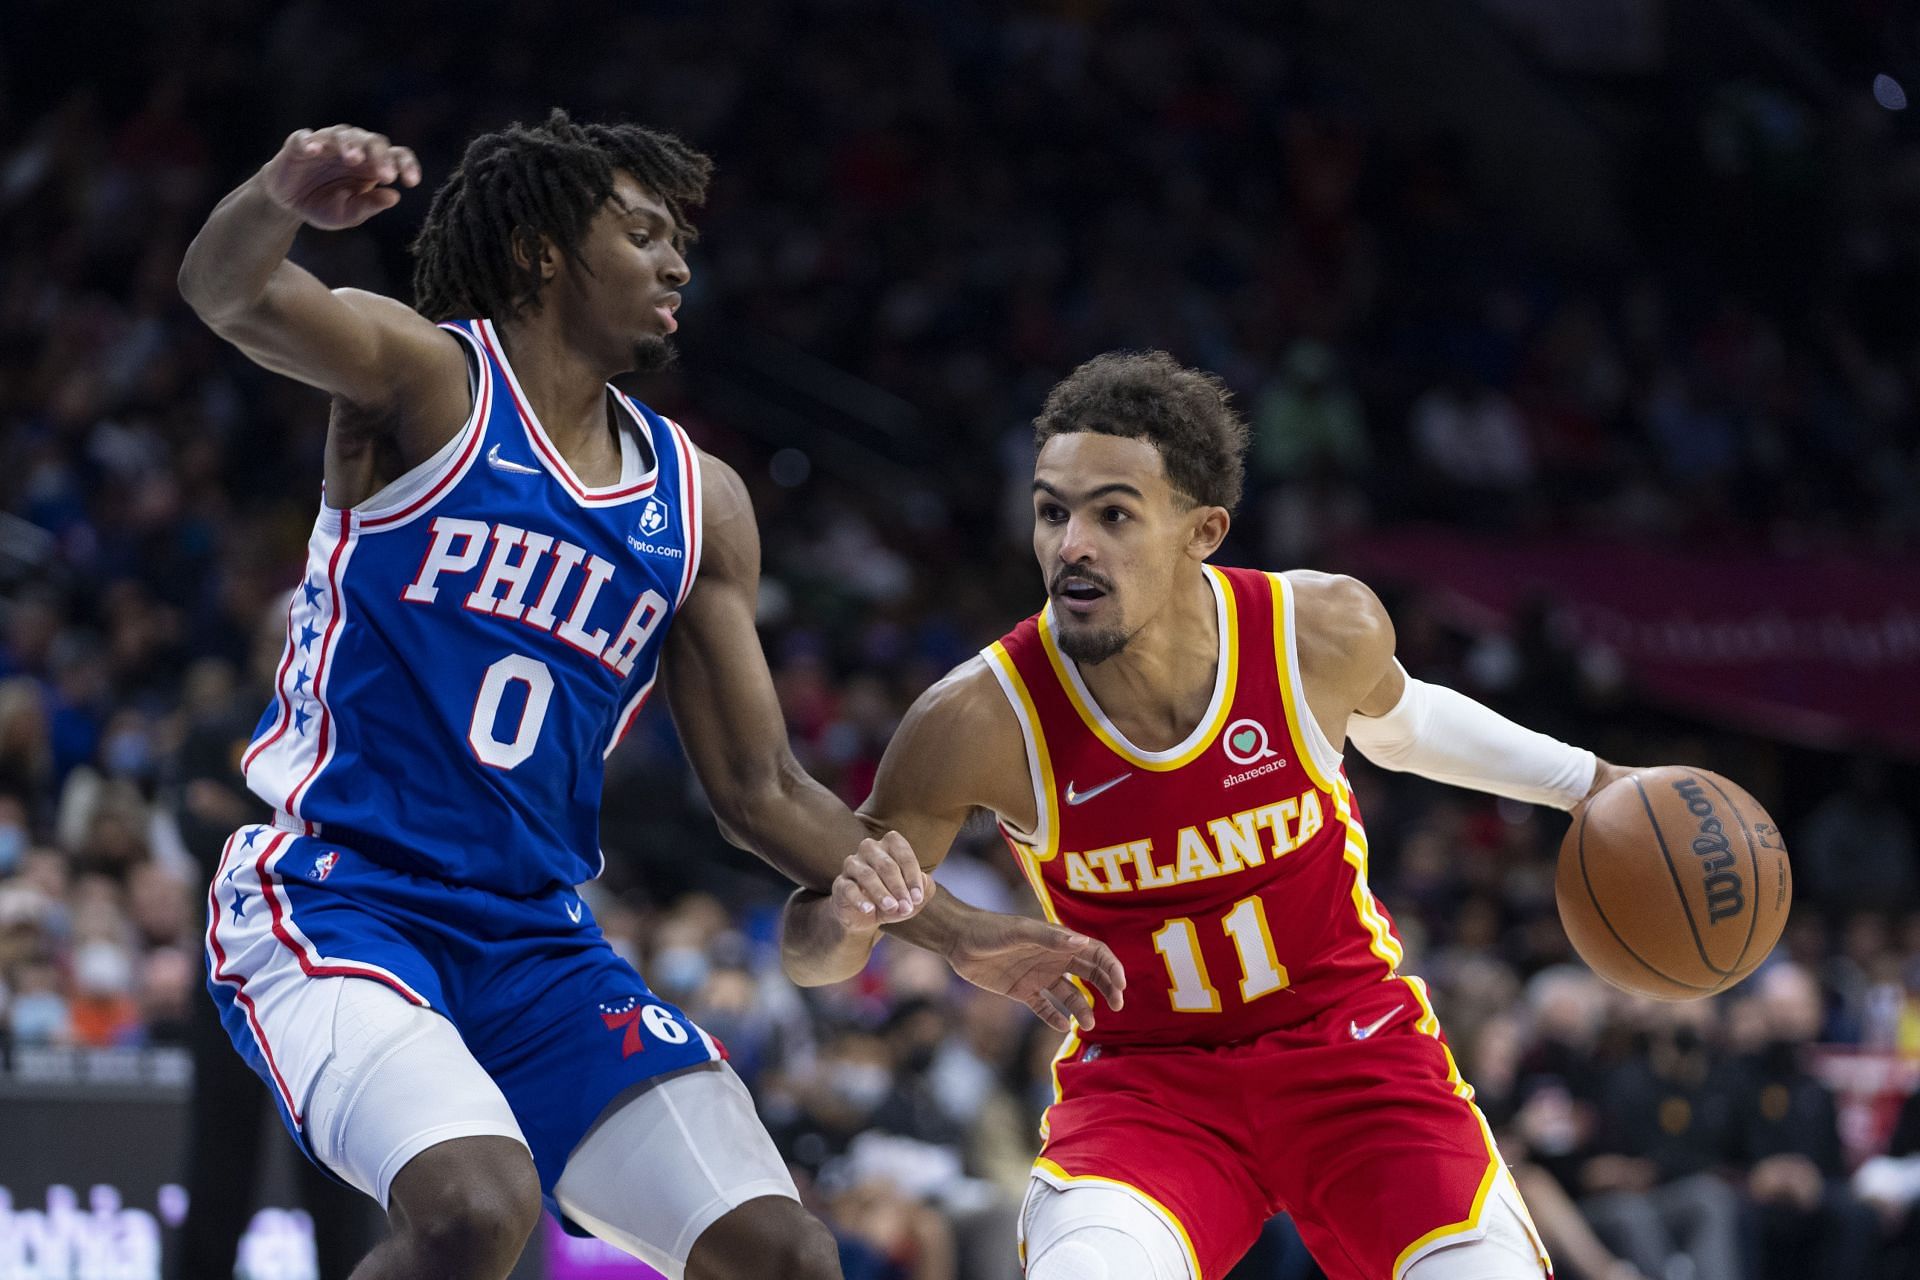 Trae Young #11 of the Atlanta Hawks drives to the basket against Tyrese Maxey #0 of the Philadelphia 76ers in the second half at the Wells Fargo Center on October 30, 2021 in Philadelphia, Pennsylvania.